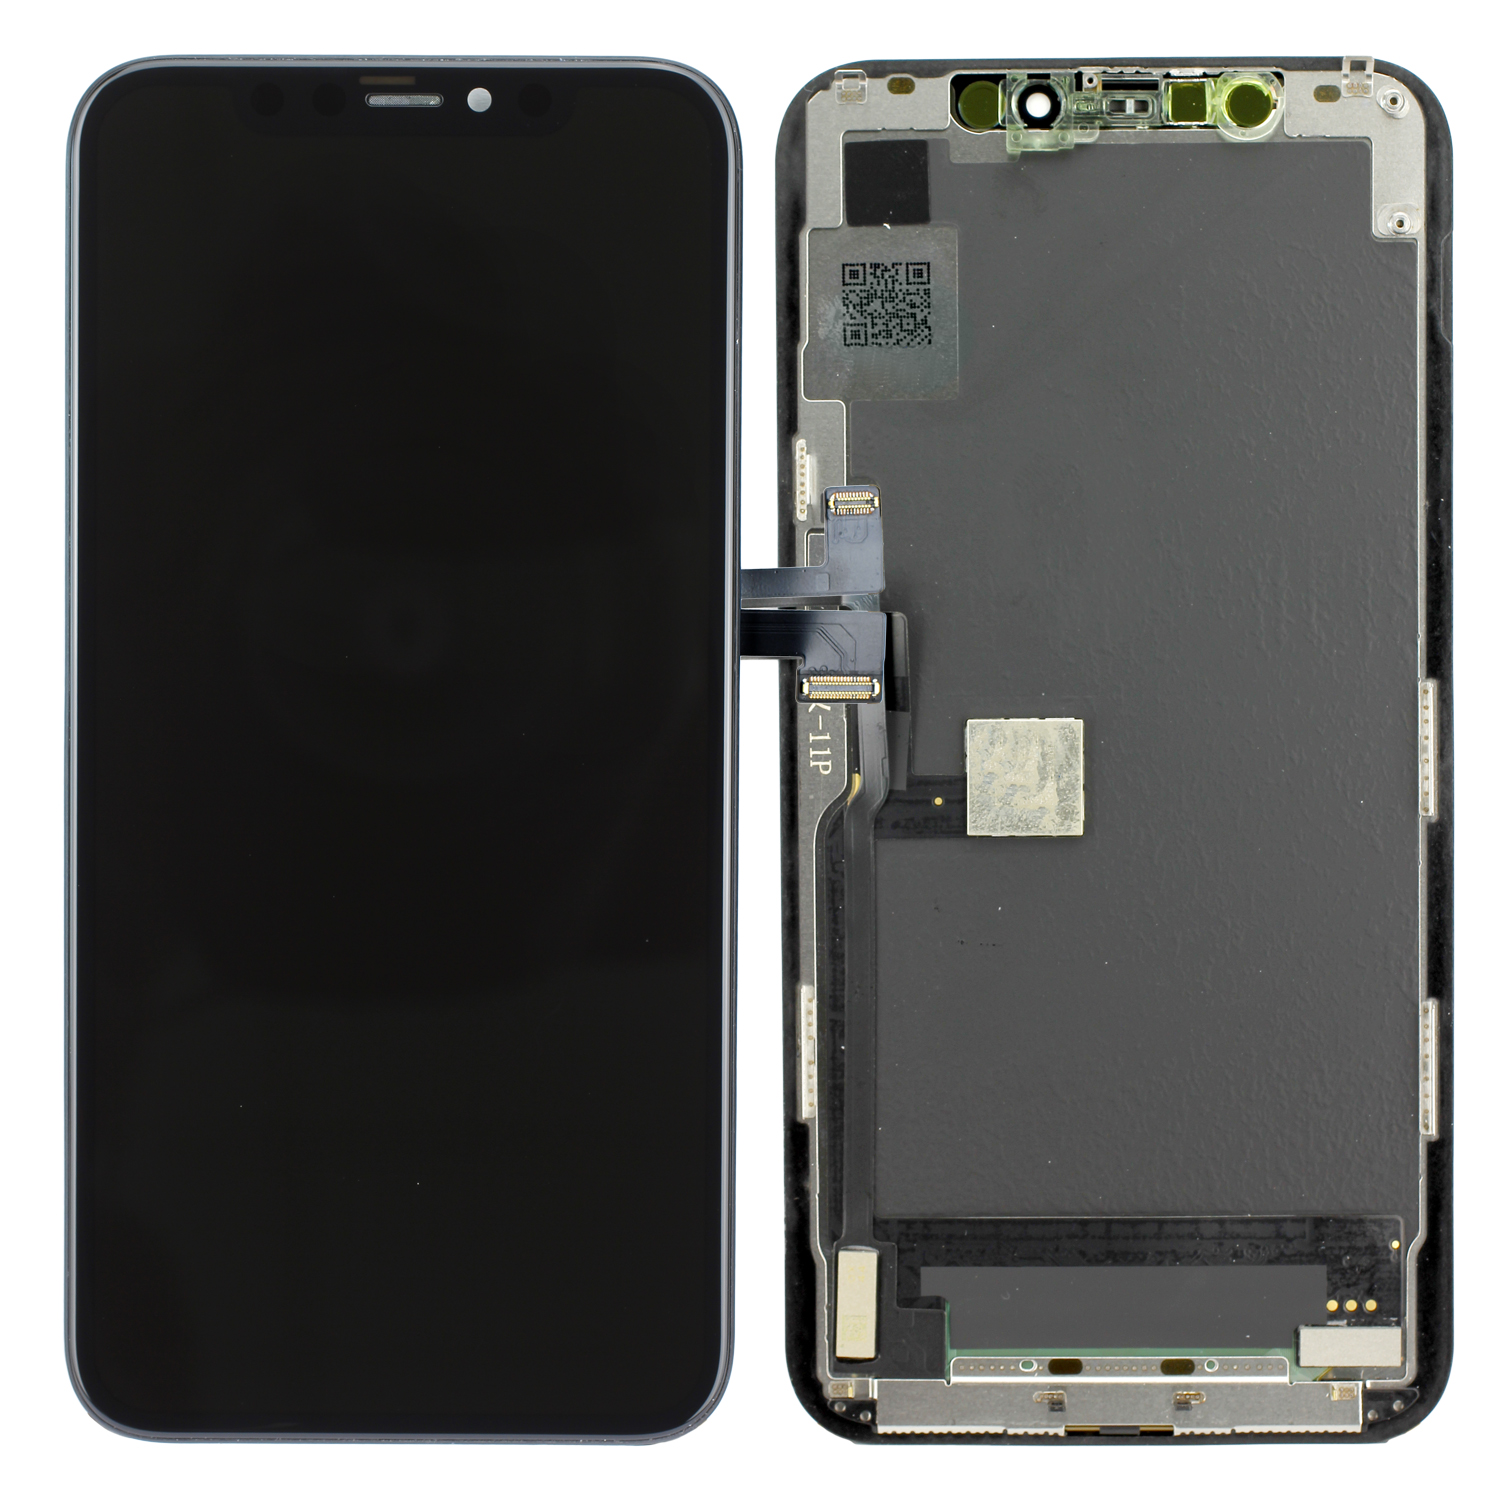 LCD Display Soft OLED, compatible with iPhone 11 Pro, Black